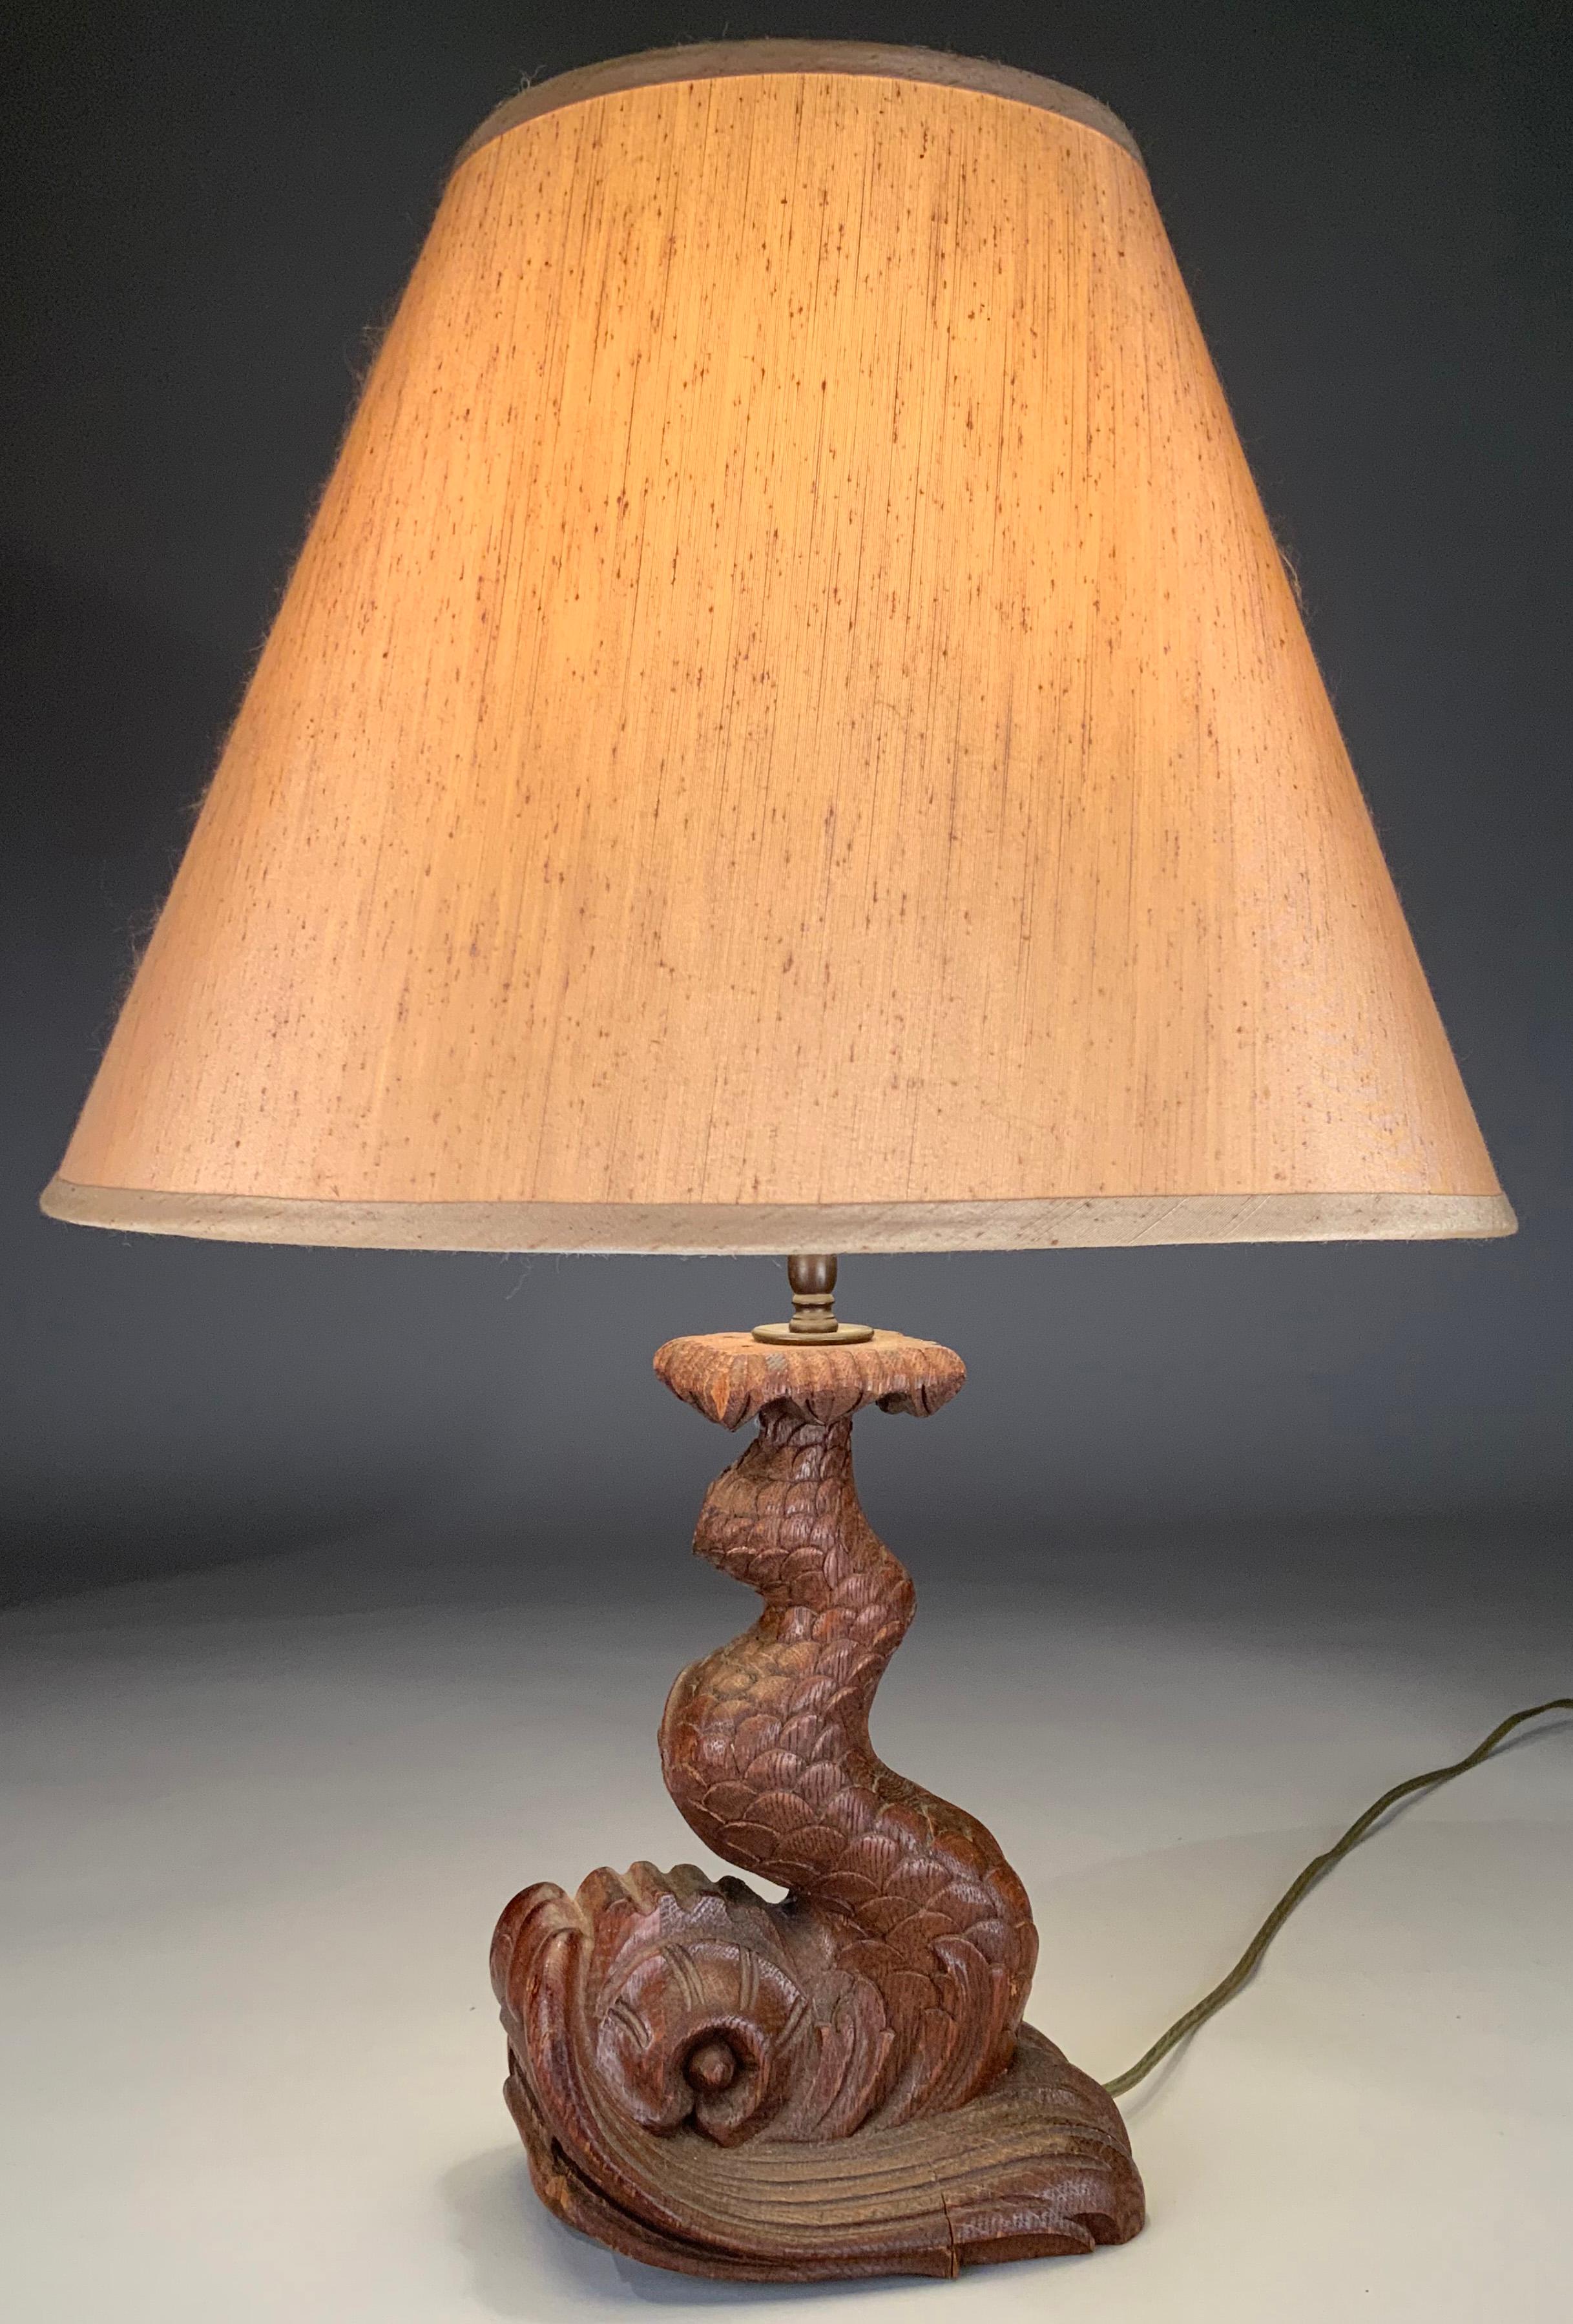 A pair of beautiful antique 1940's carved wood lamps in the form of Koi Fish. Amazing carving and scale and details - with the tails curving up towards the top of the bases. shades not included. in good antique condition with age expected wear and a